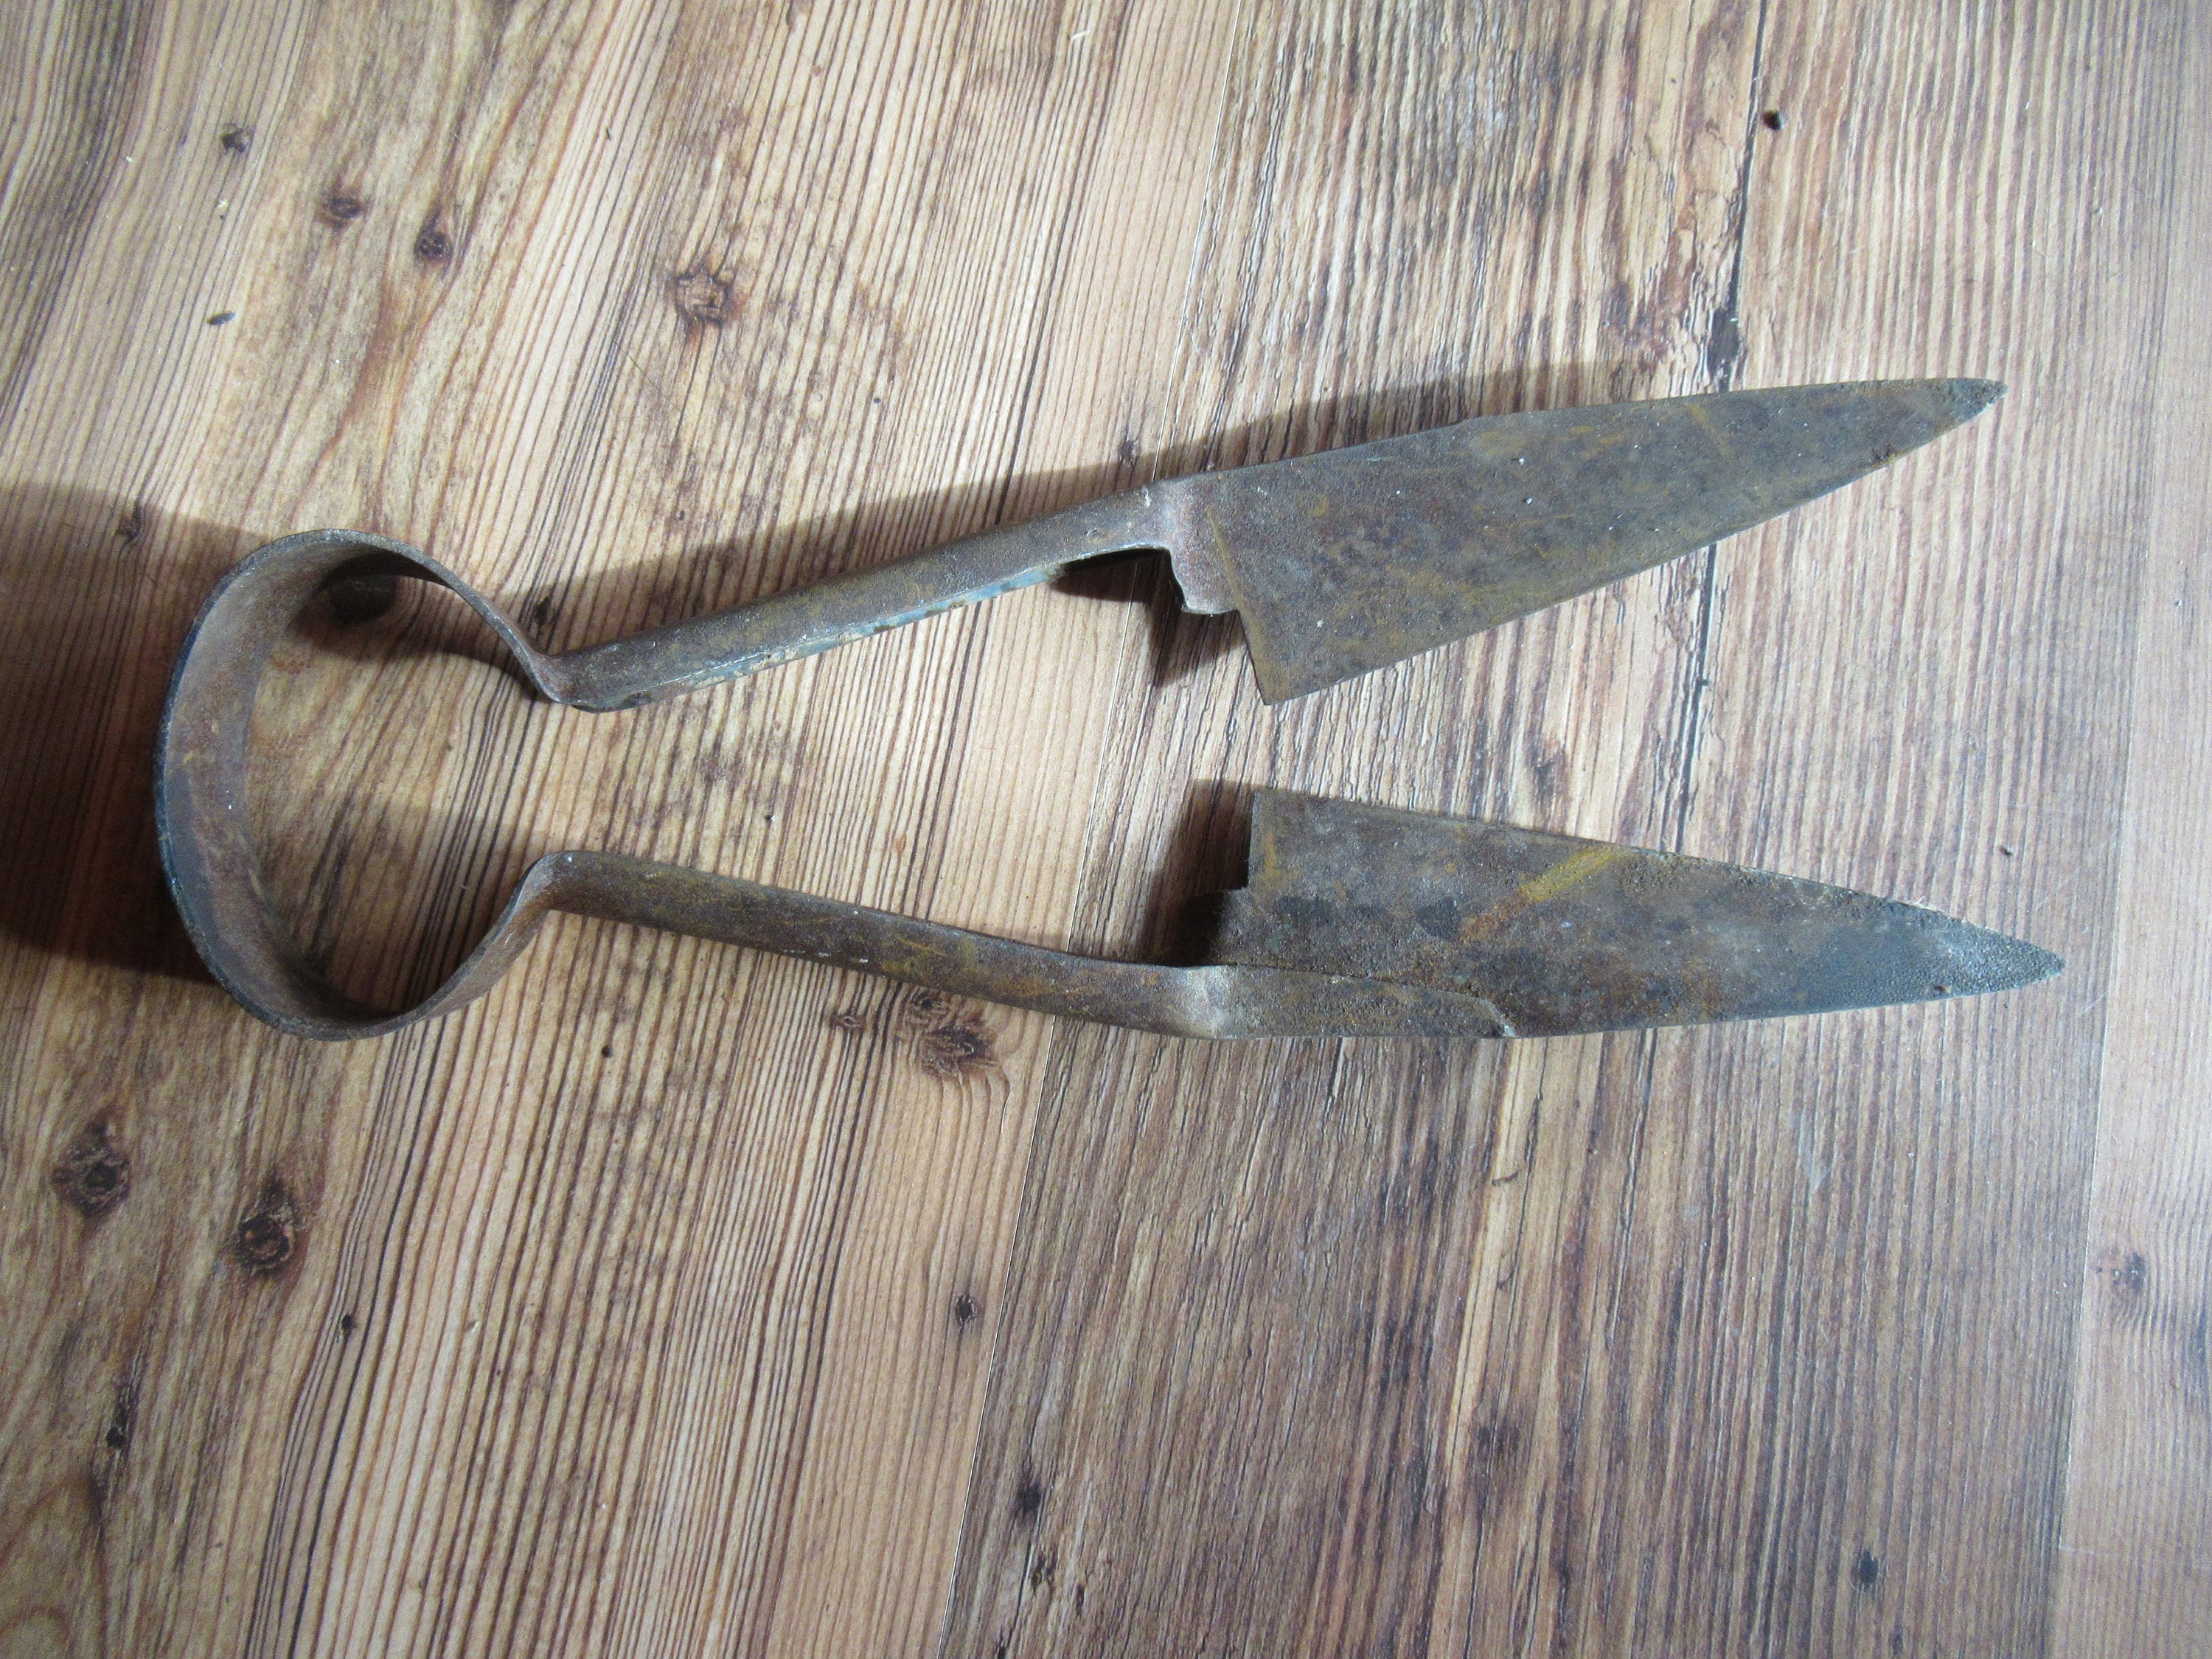 Vintage 1930s to 1950s Metal Sheep Shears Trimmers Rustic Farm